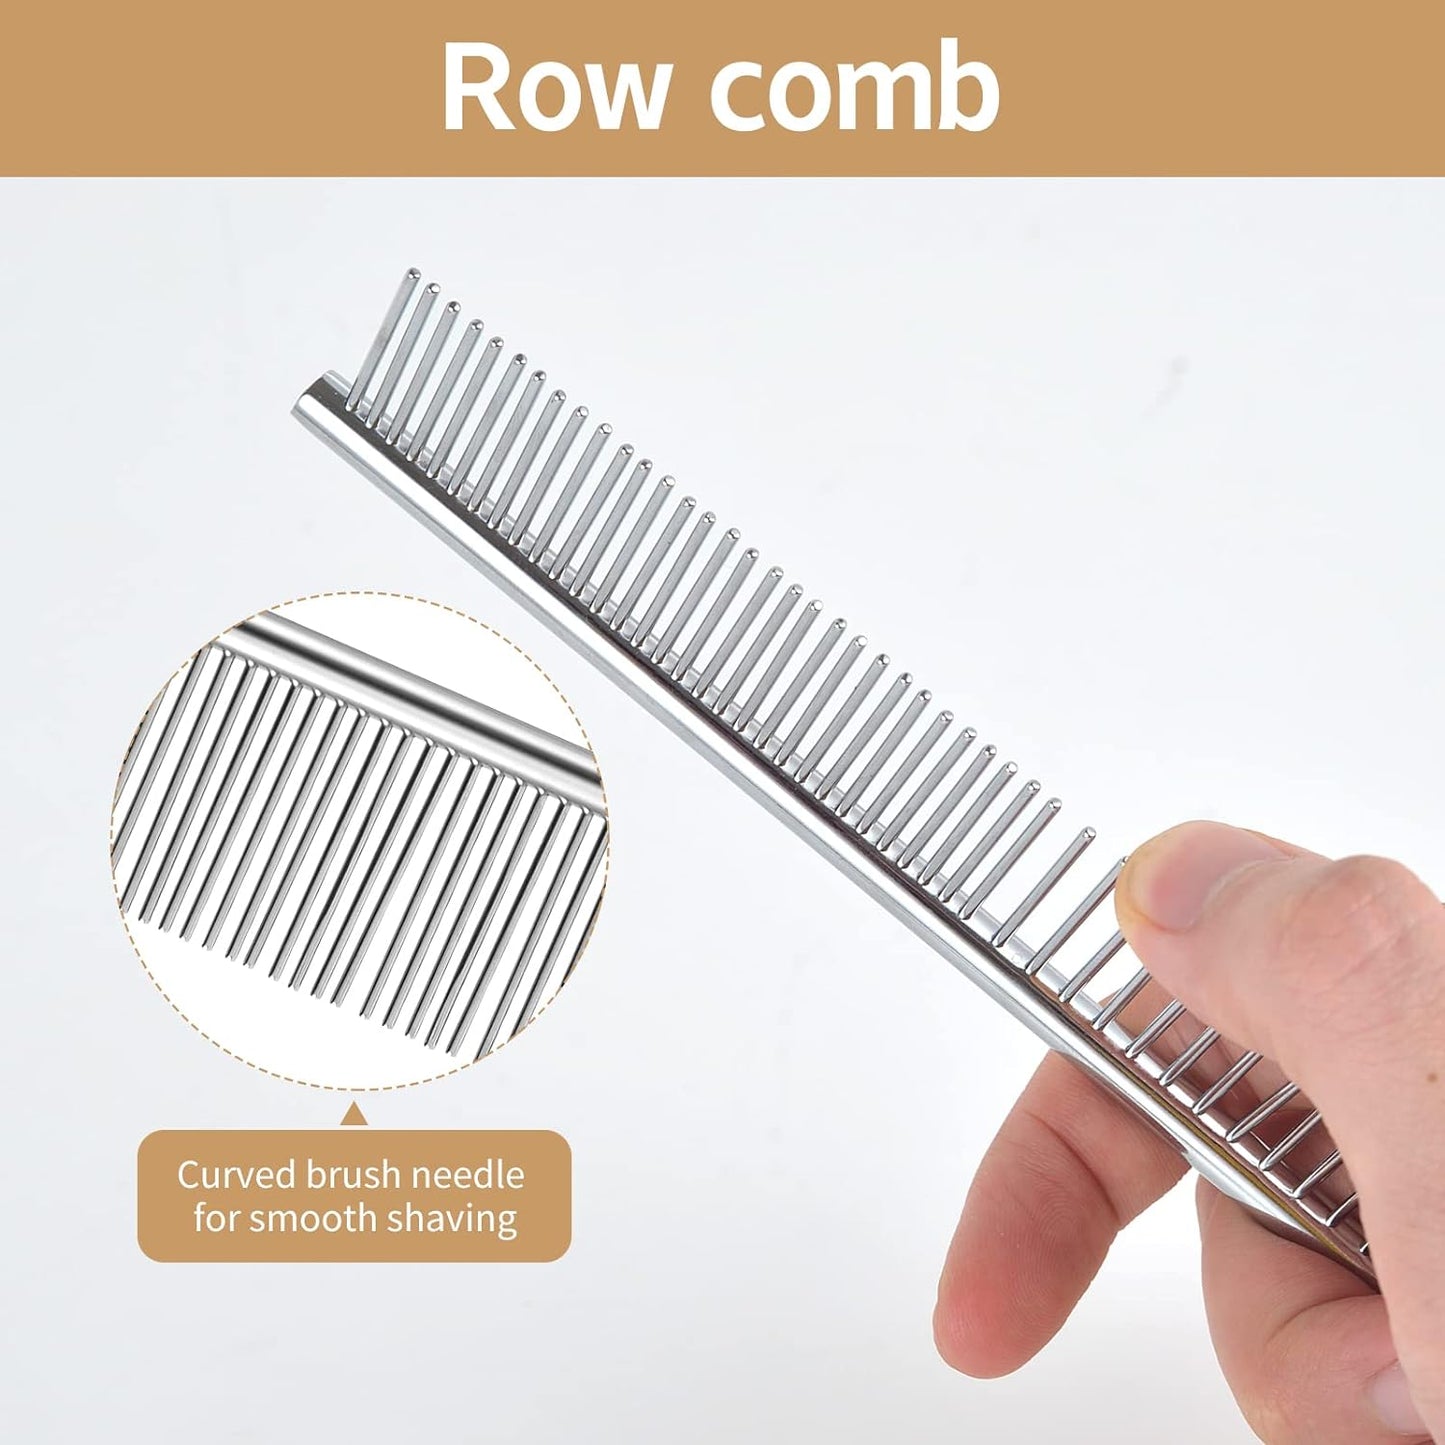 2 Pack Macrame Fringe Comb Set Stainless Steel Comb for Making Knitting Cord Rope Macrame Plant Hangers Wall Hangings Pets Hair Combing